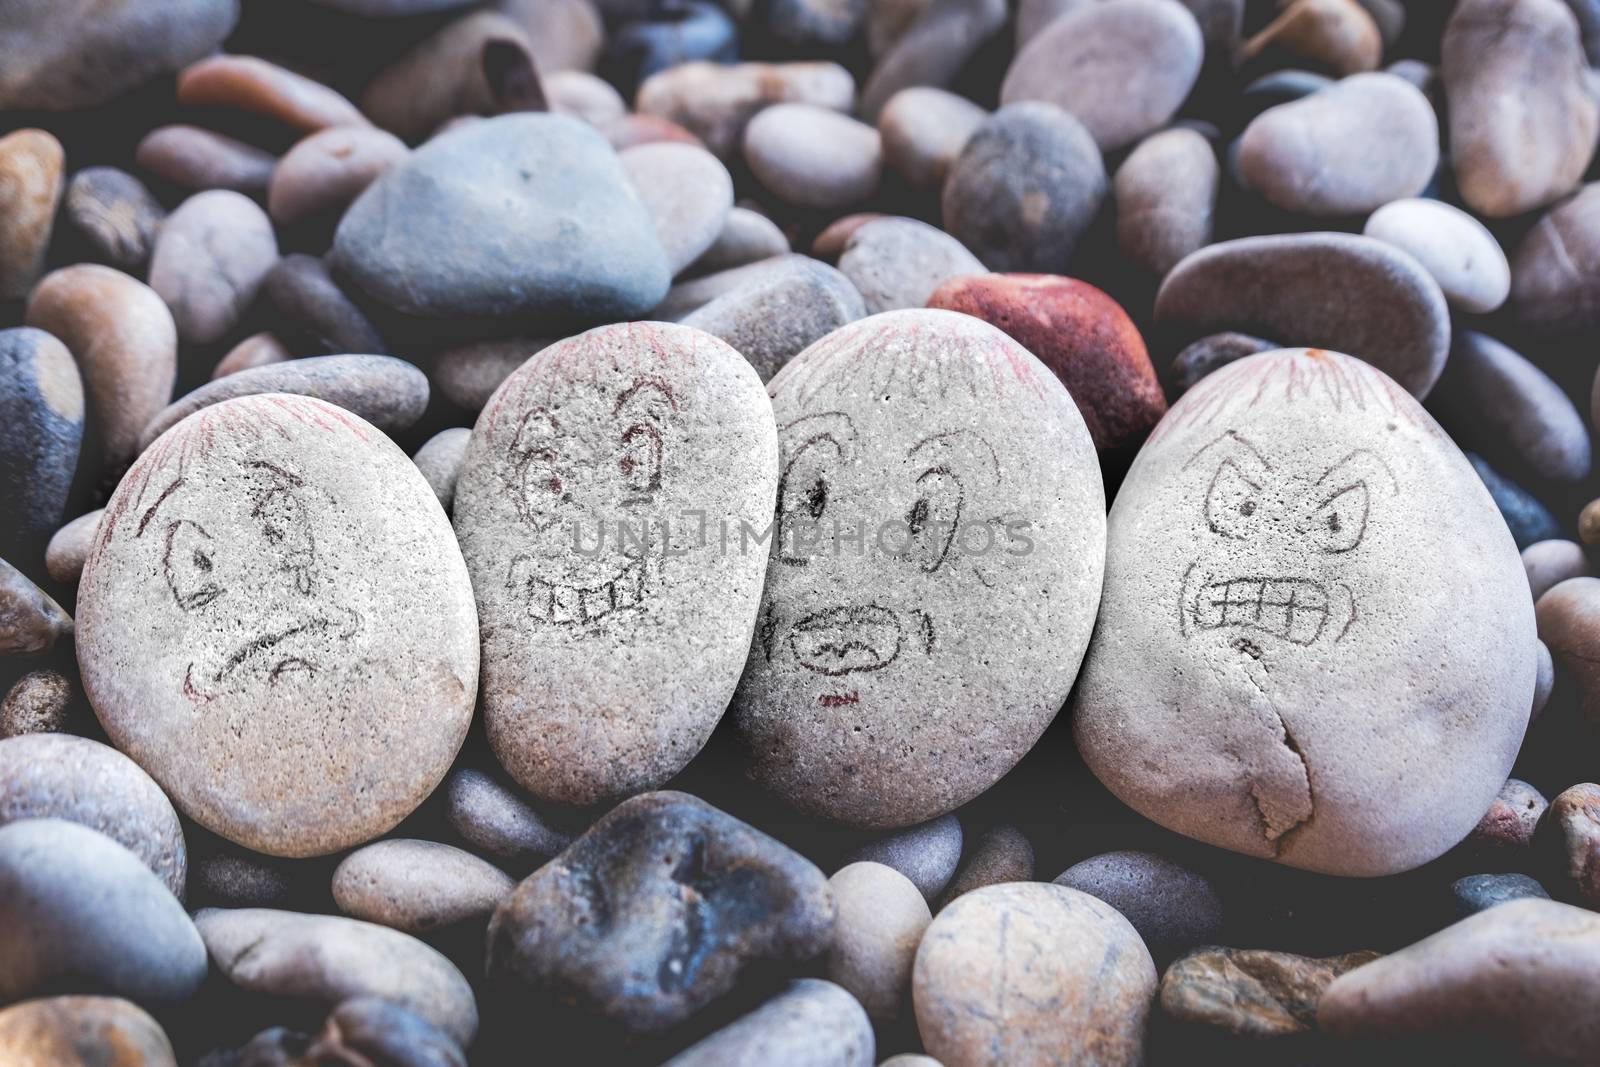 managing emotions emoji faces on stones - sad, happy, surprised worried and angry draw by LucaLorenzelli